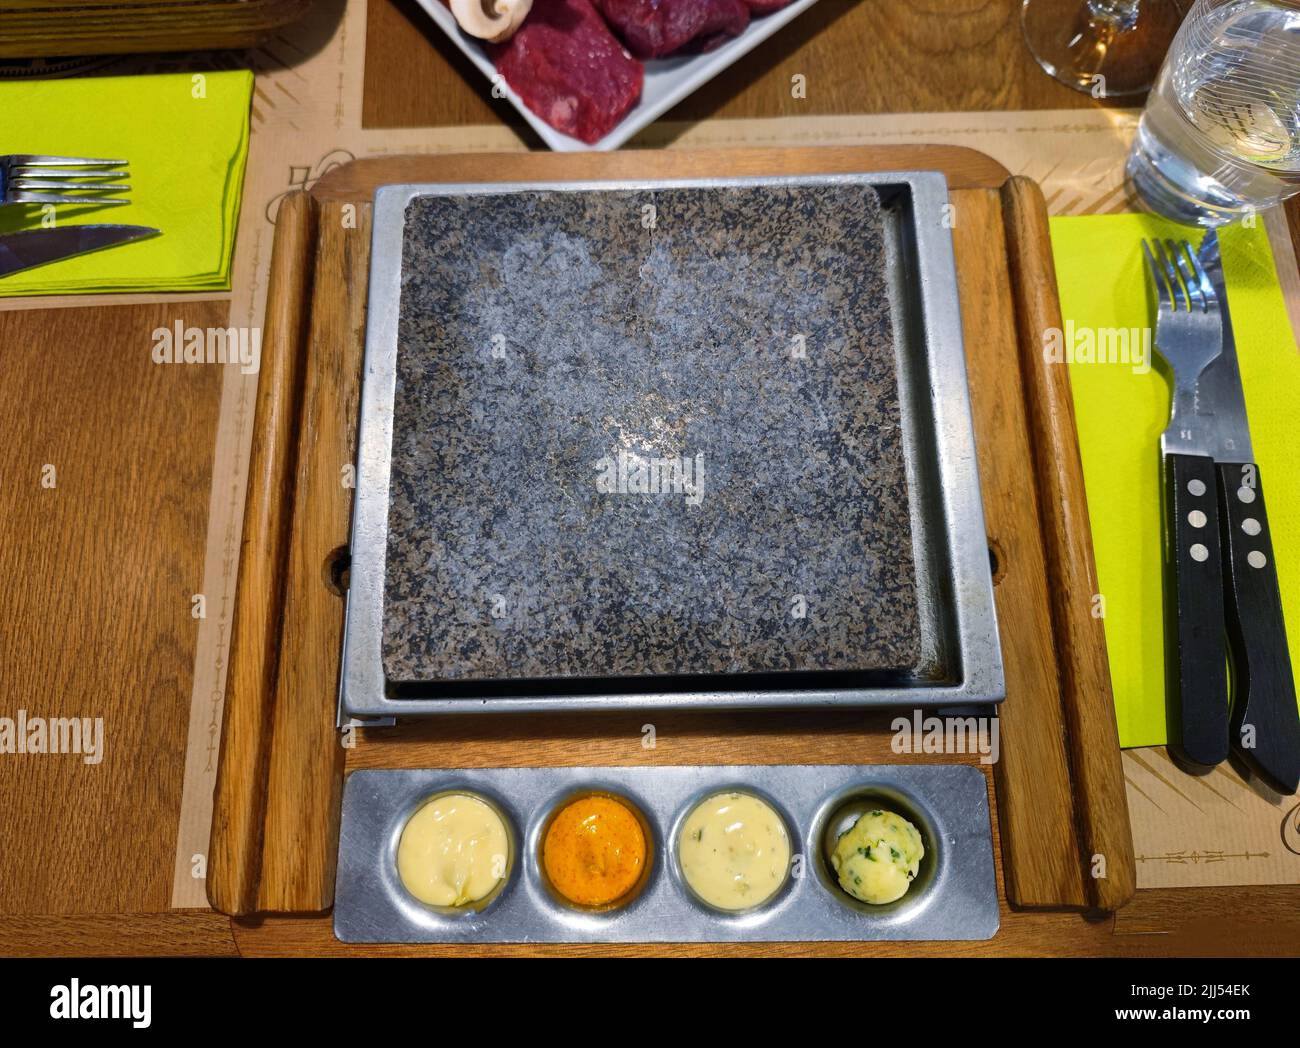 Clean stone grill on a restaurant table with different kinds of sauces on the bottom. People can put their own meat on the grill Stock Photo